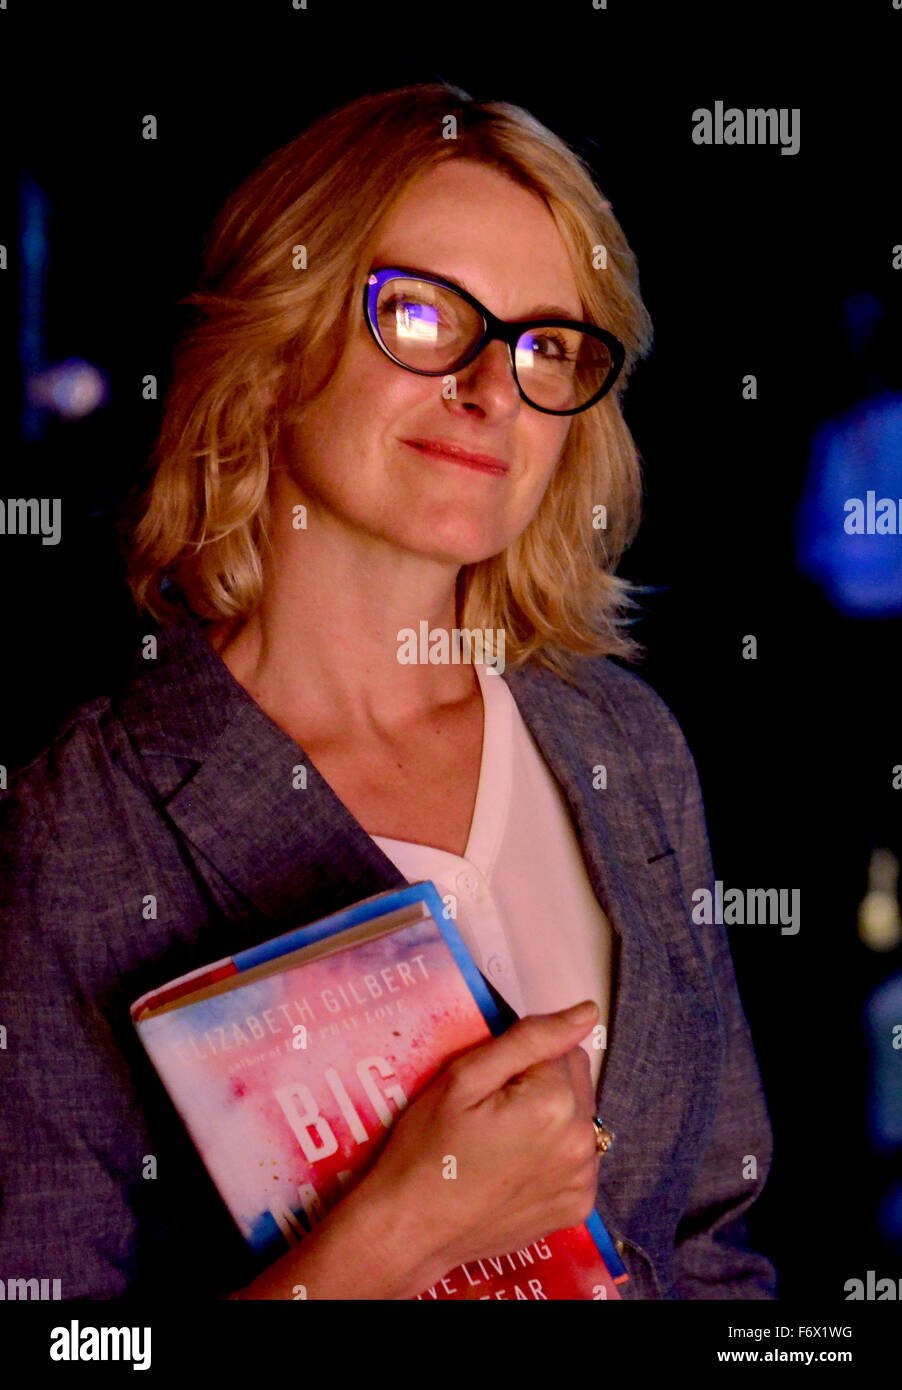 'Eat Pray Love' author Elizabeth Gilbert speaks and reads from her new book 'Big Magic' presented by Books and Books at the James L Knight Concert Hall at Adrienne Arsht Center  Featuring: Elizabeth Gilbert Where: Miami, Florida, United States When: 20 Oc Stock Photo